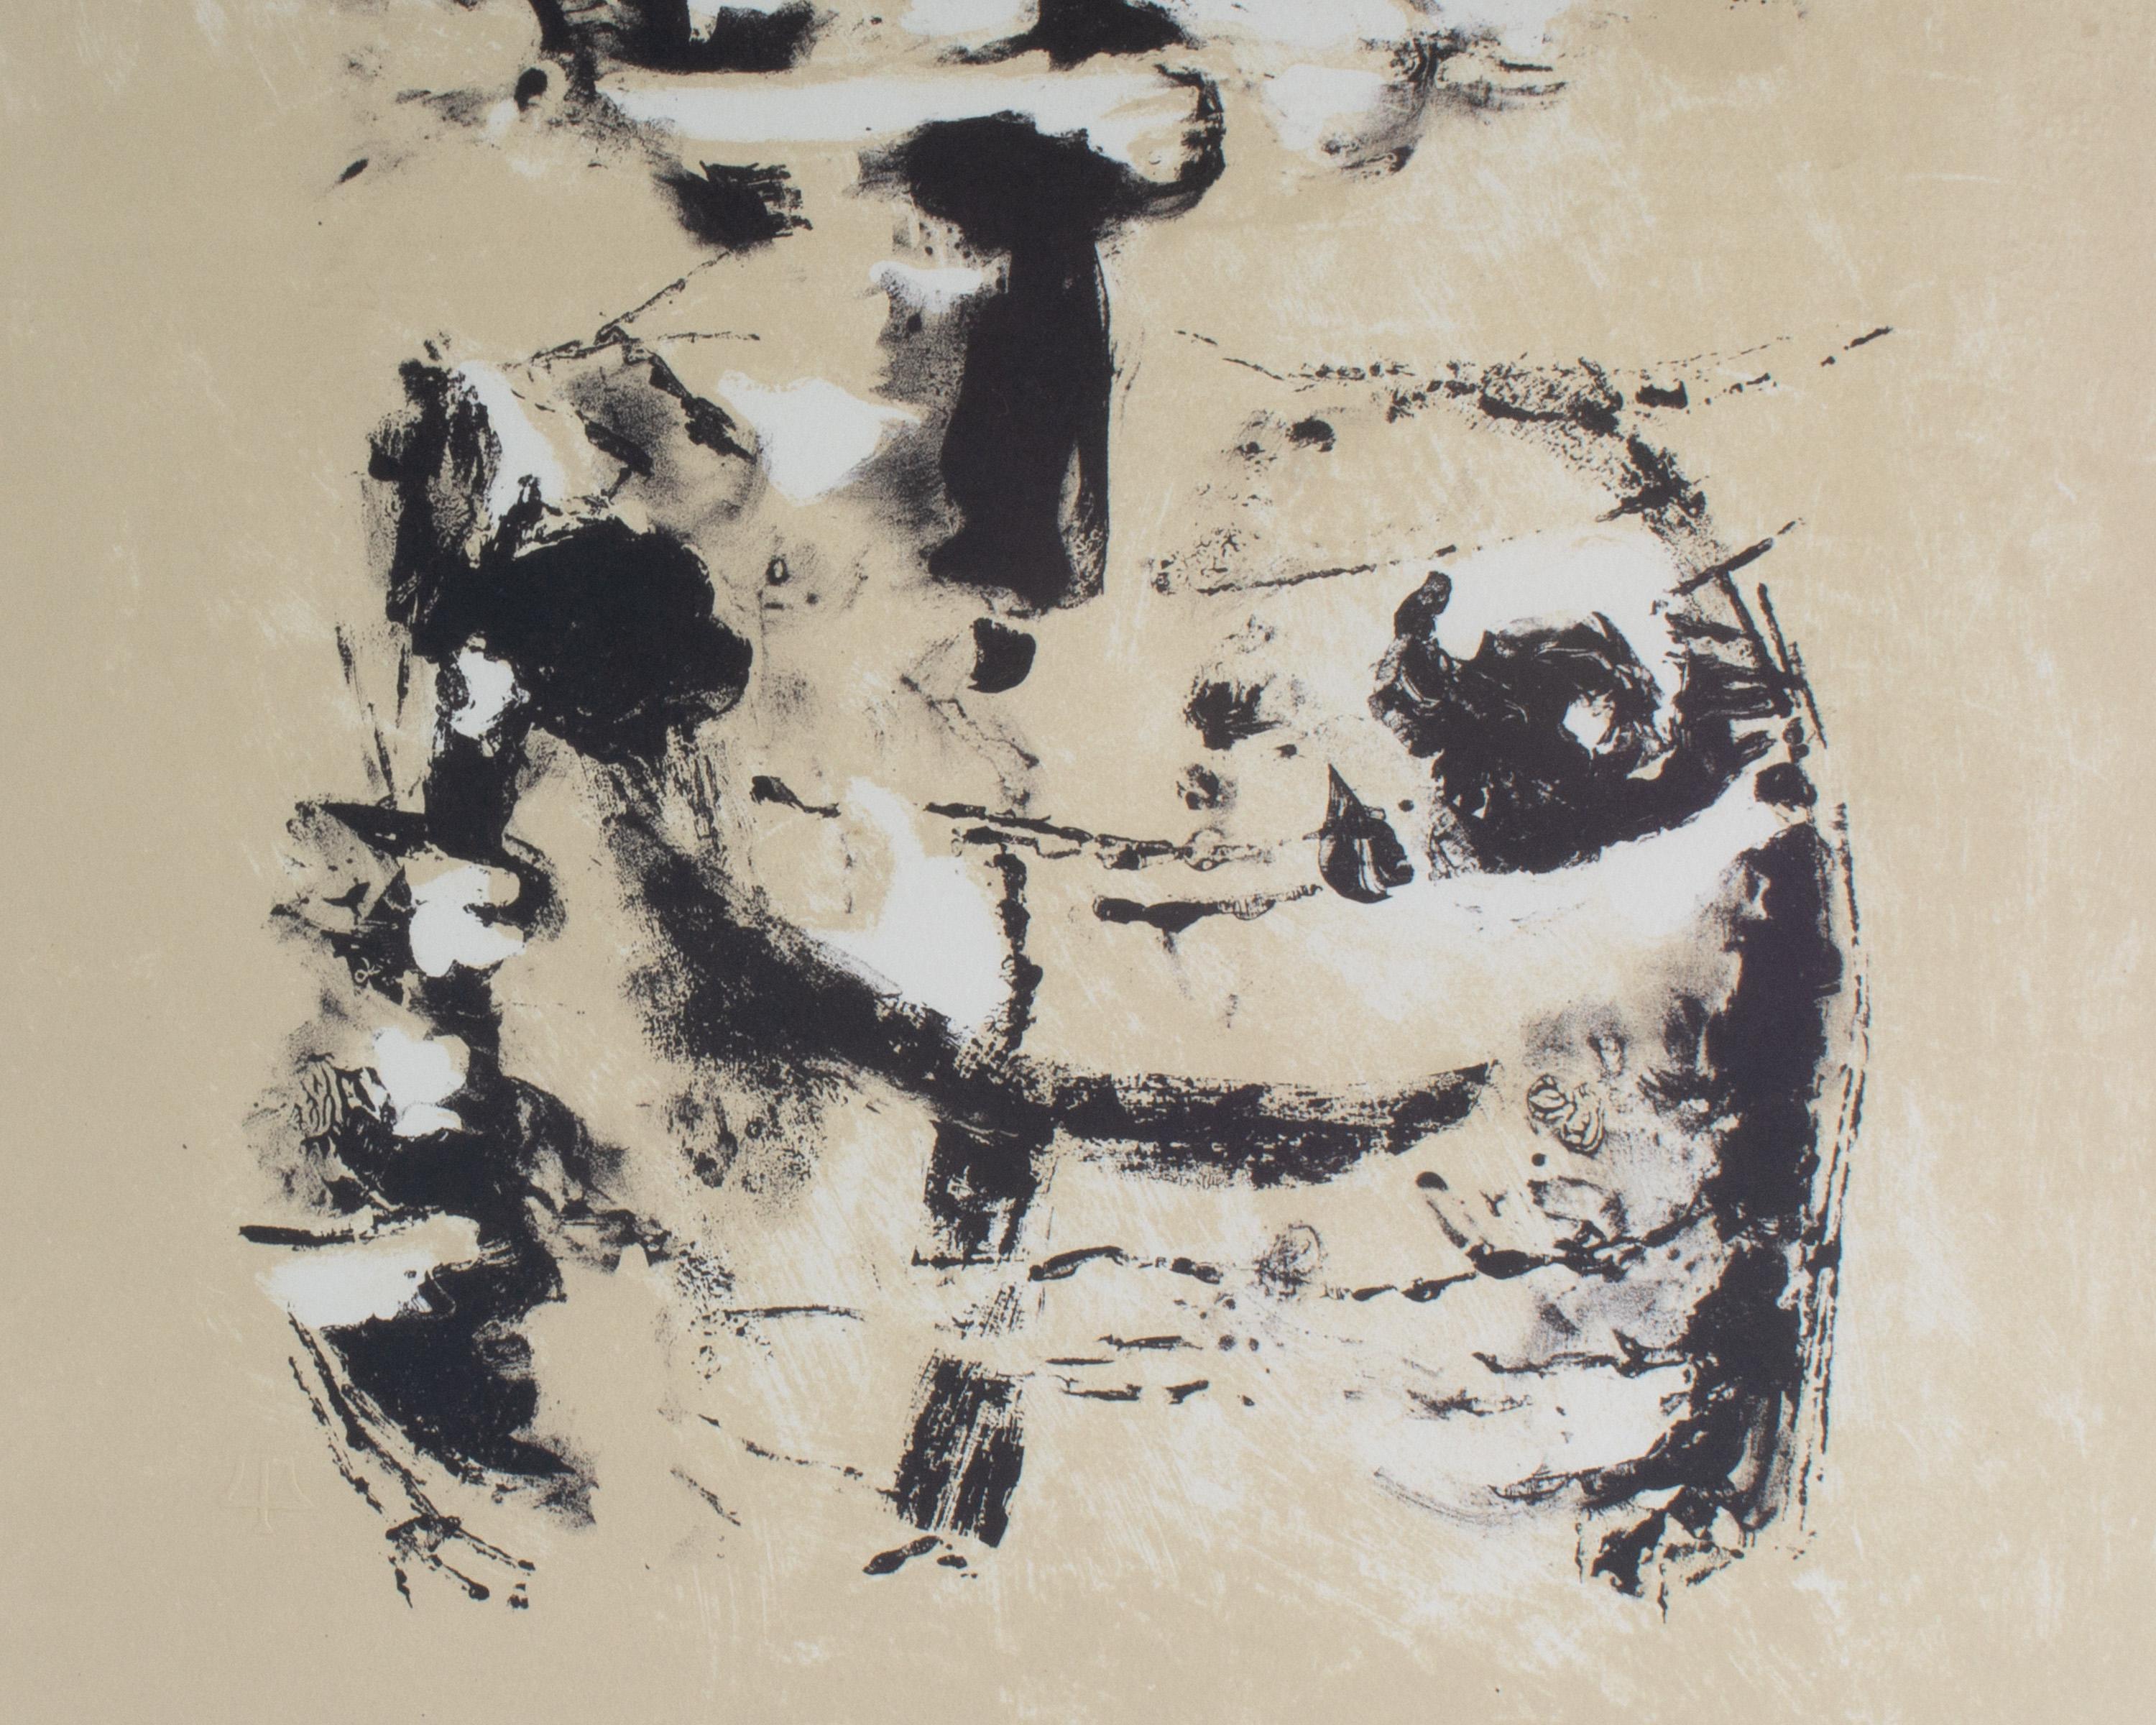 Glass Adja Yunkers Signed 1960s “Salt iv” Limited Edition Abstract Lithograph For Sale